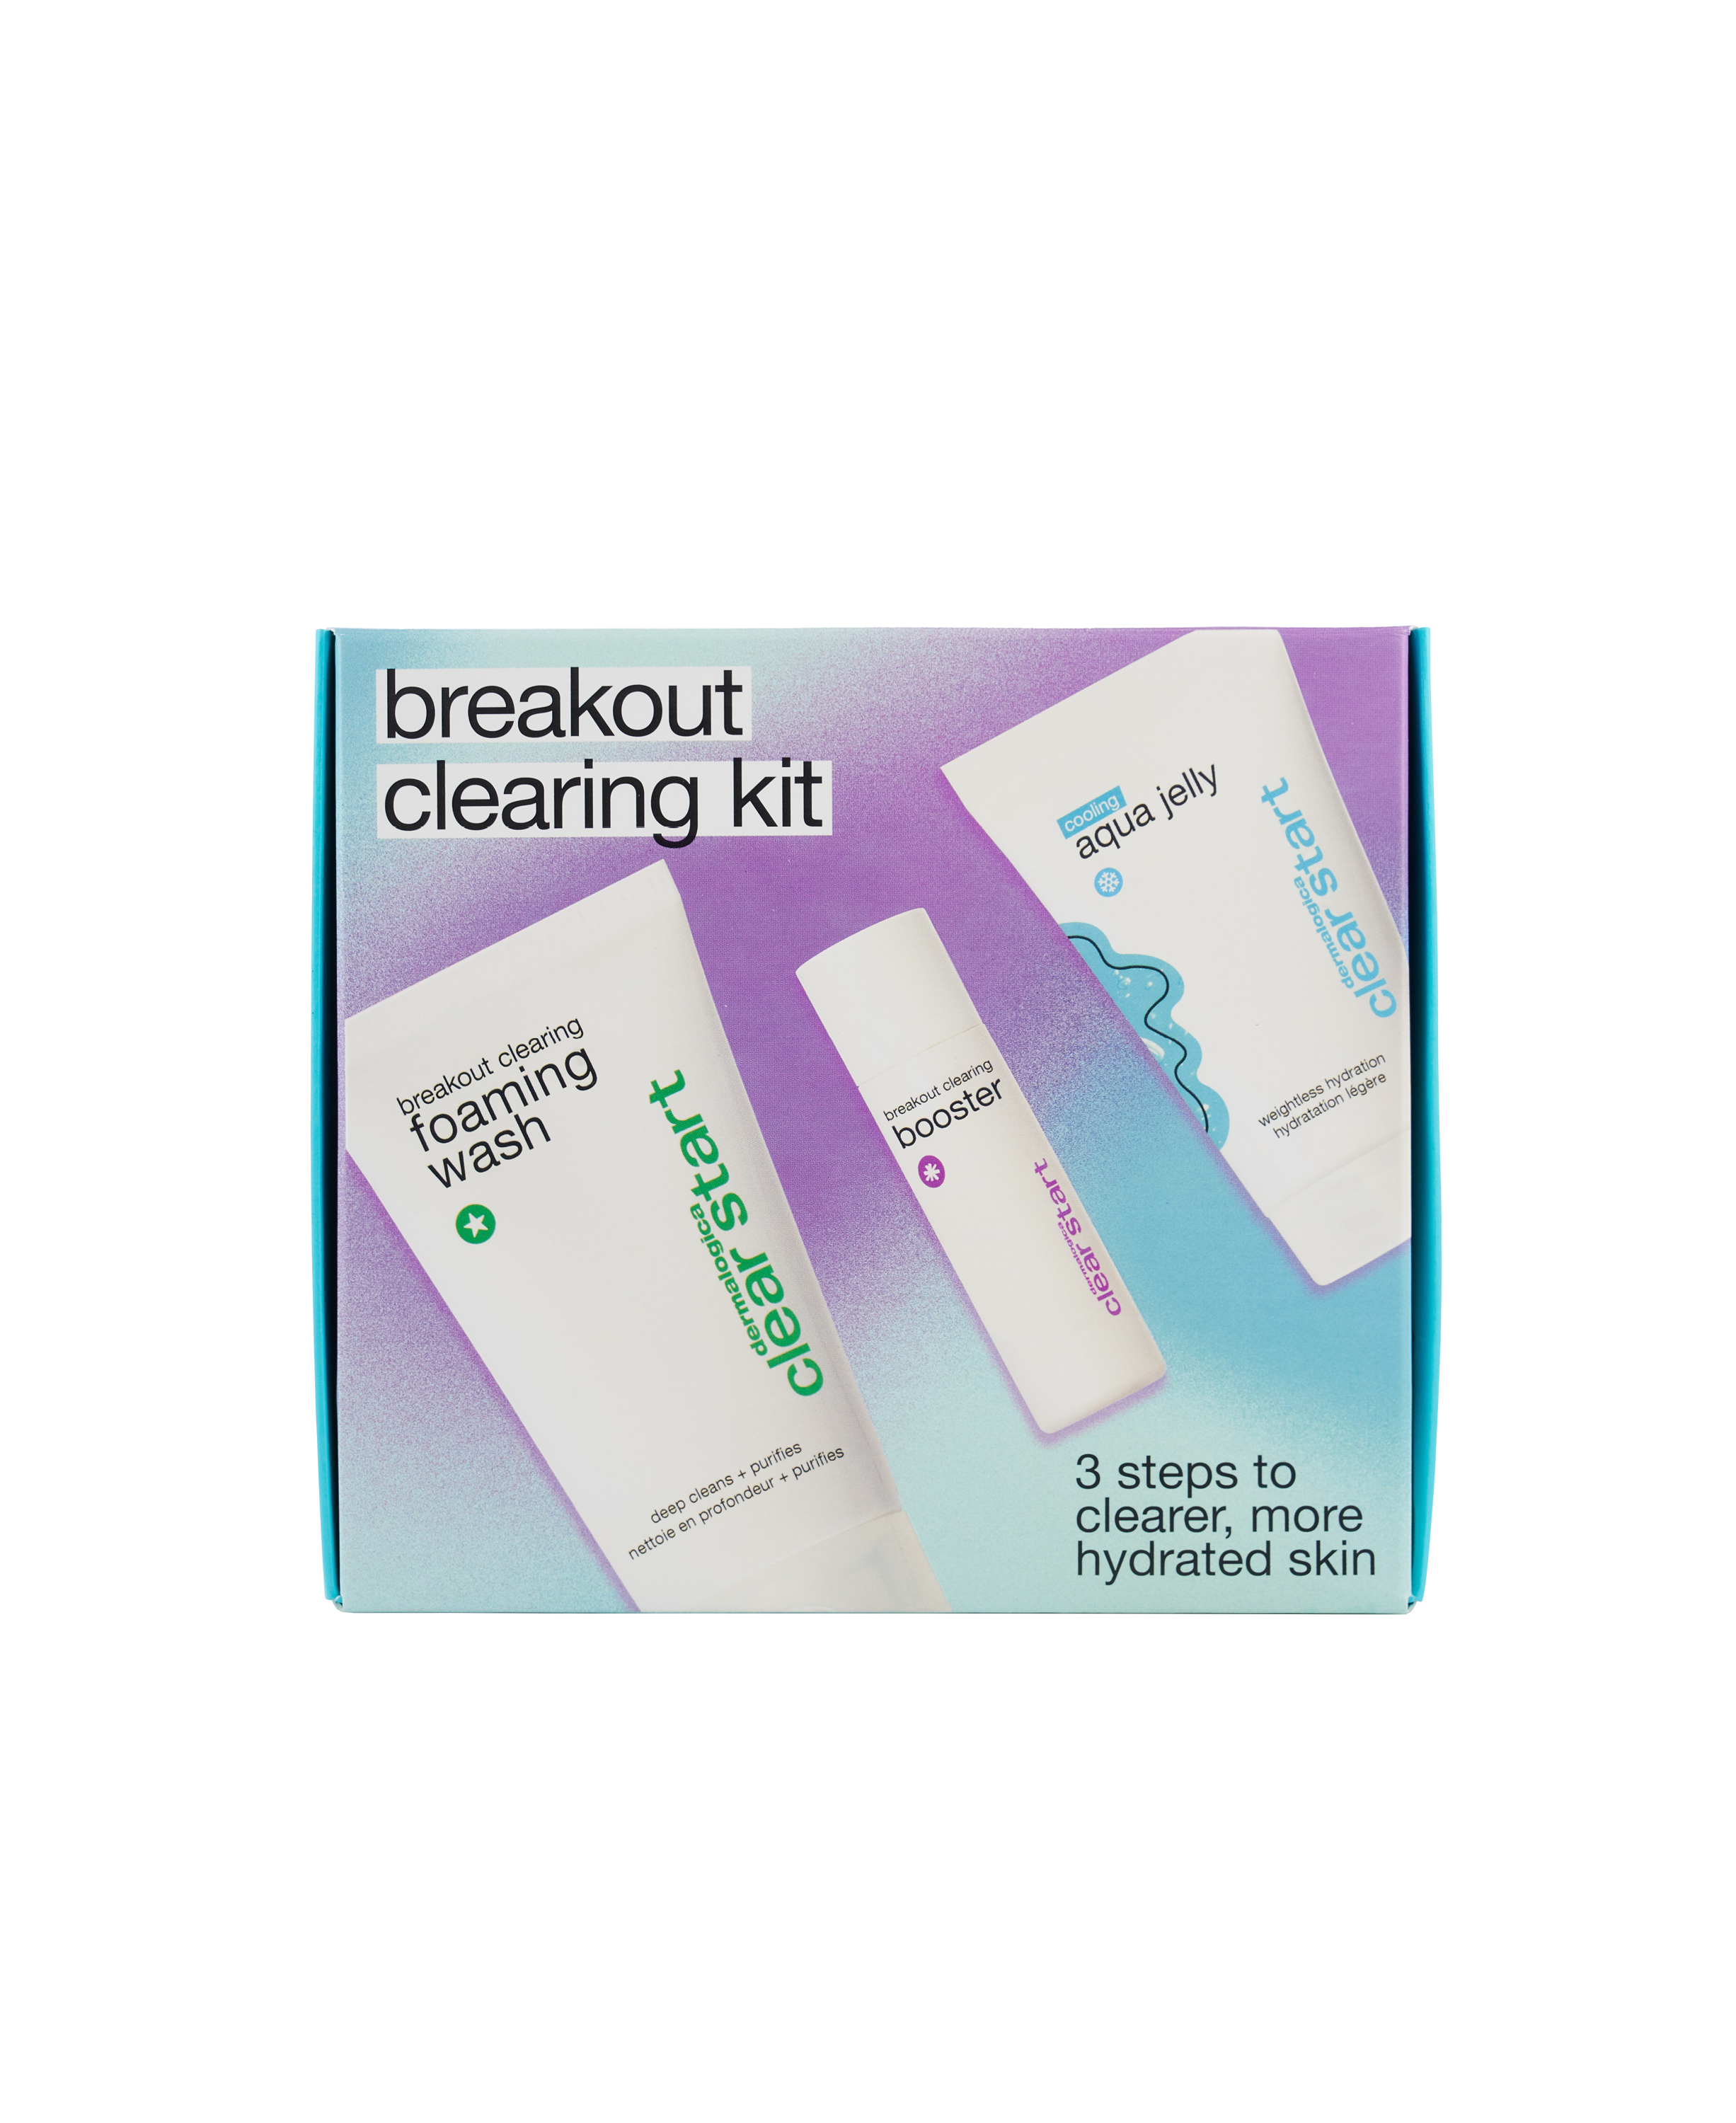  Breakout Clearing Kit